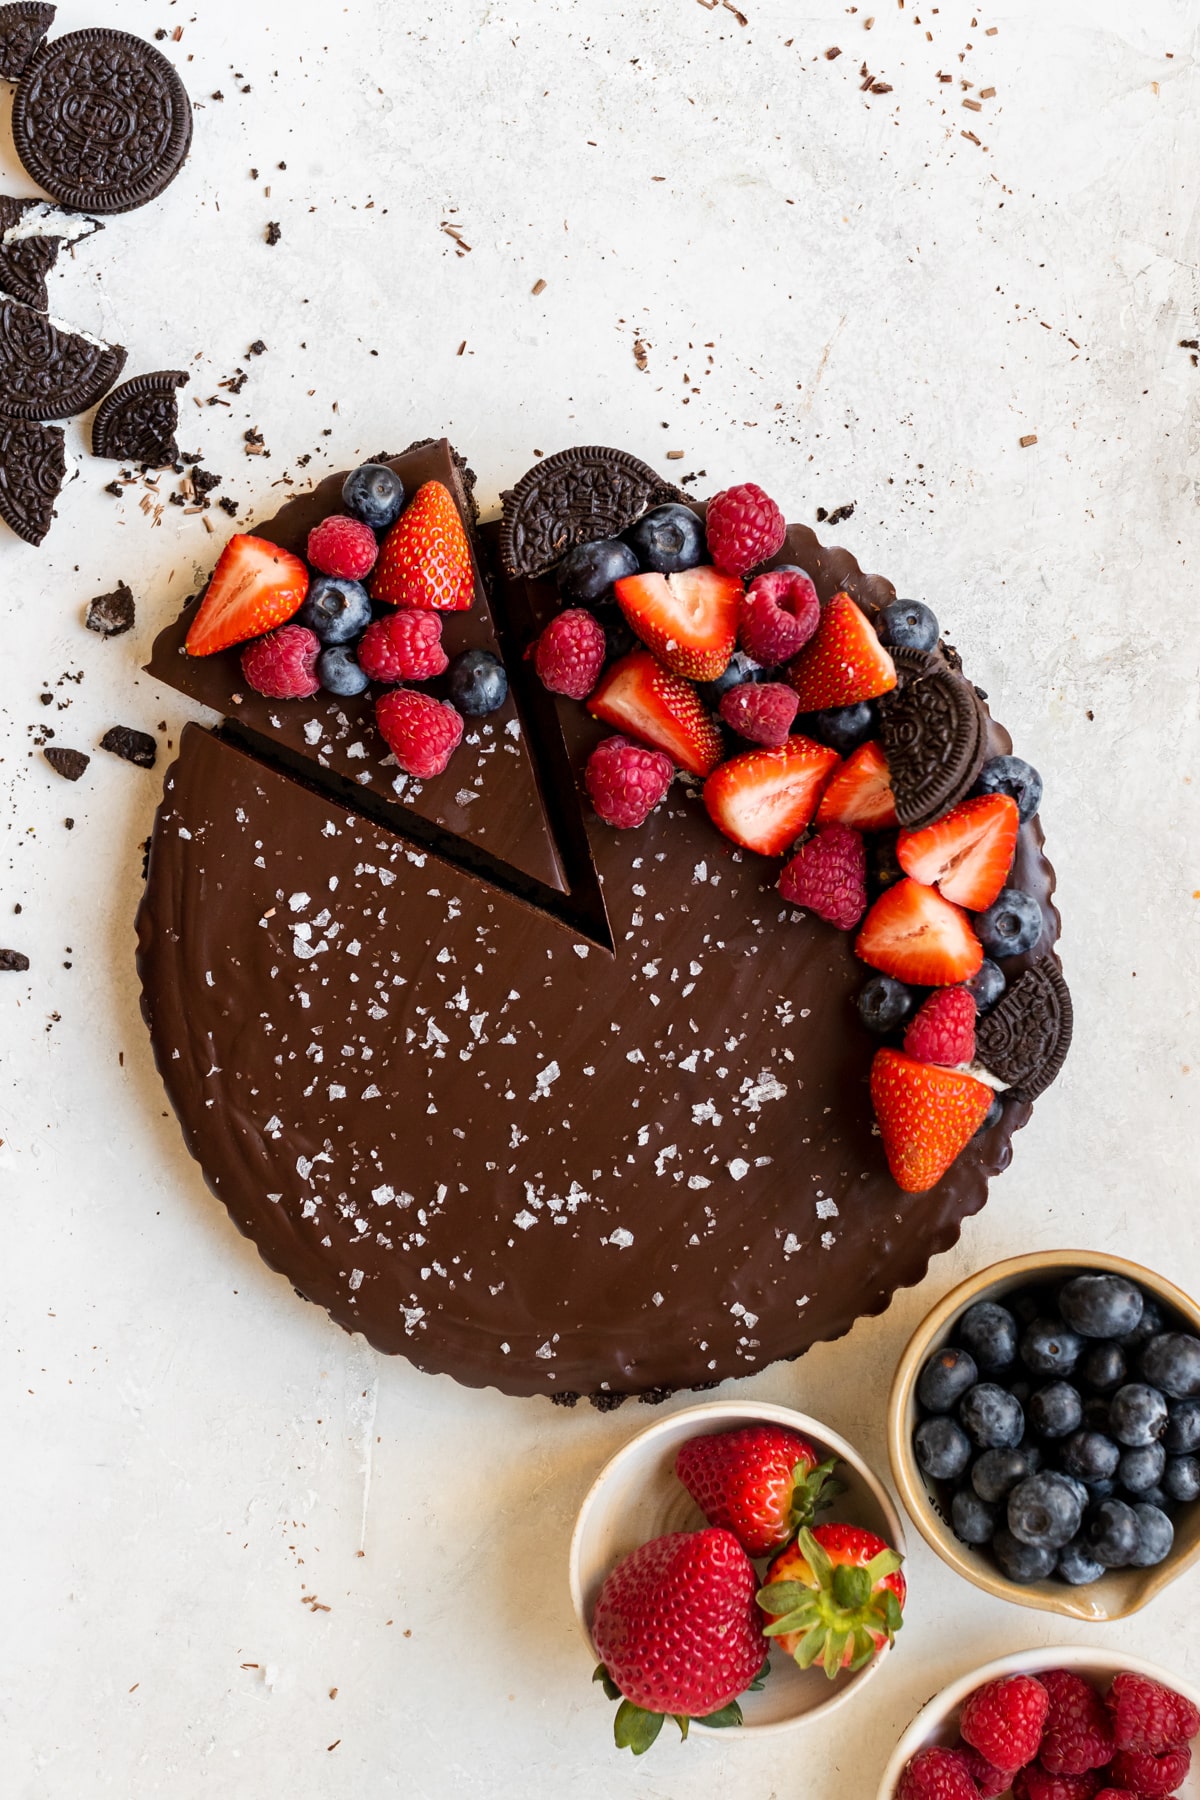 chocolate tart with one slice cut out, topped with berries and sea salt.